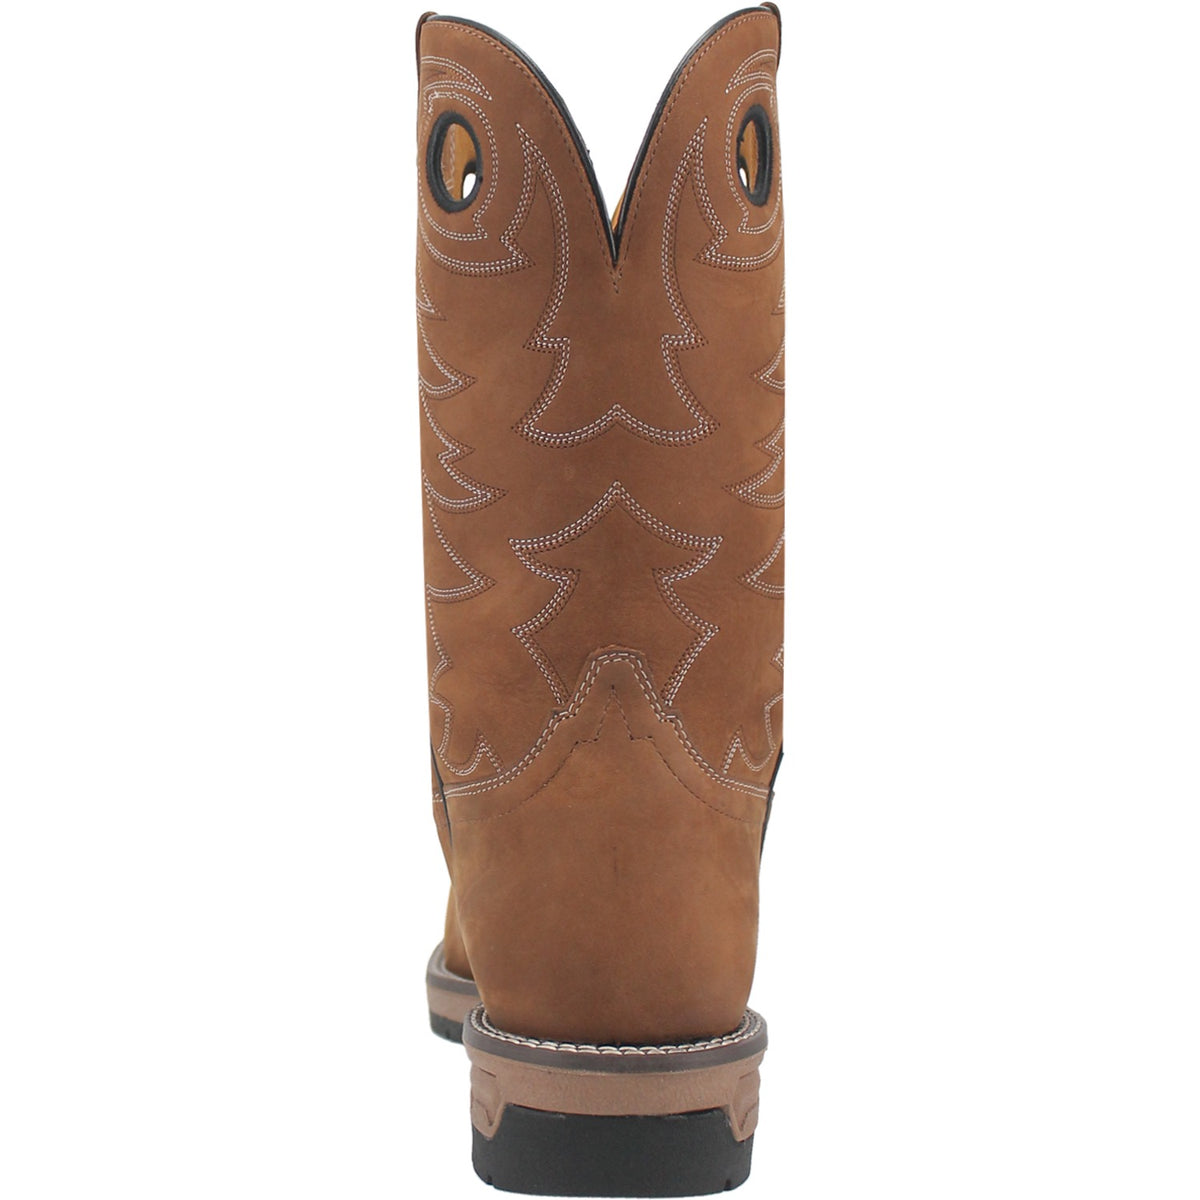 DECKER STEEL TOE LEATHER BOOT Cover